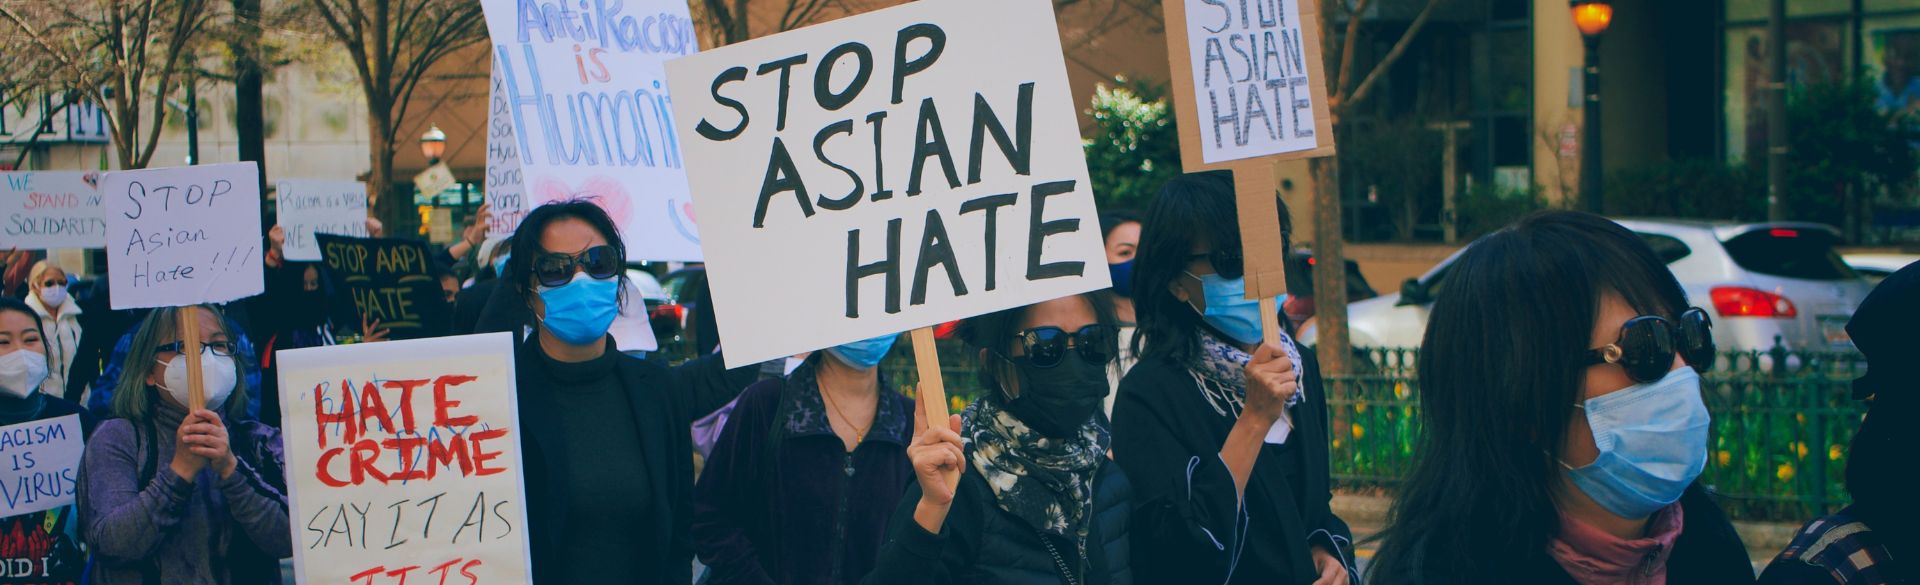 Stop Asian Hate protest